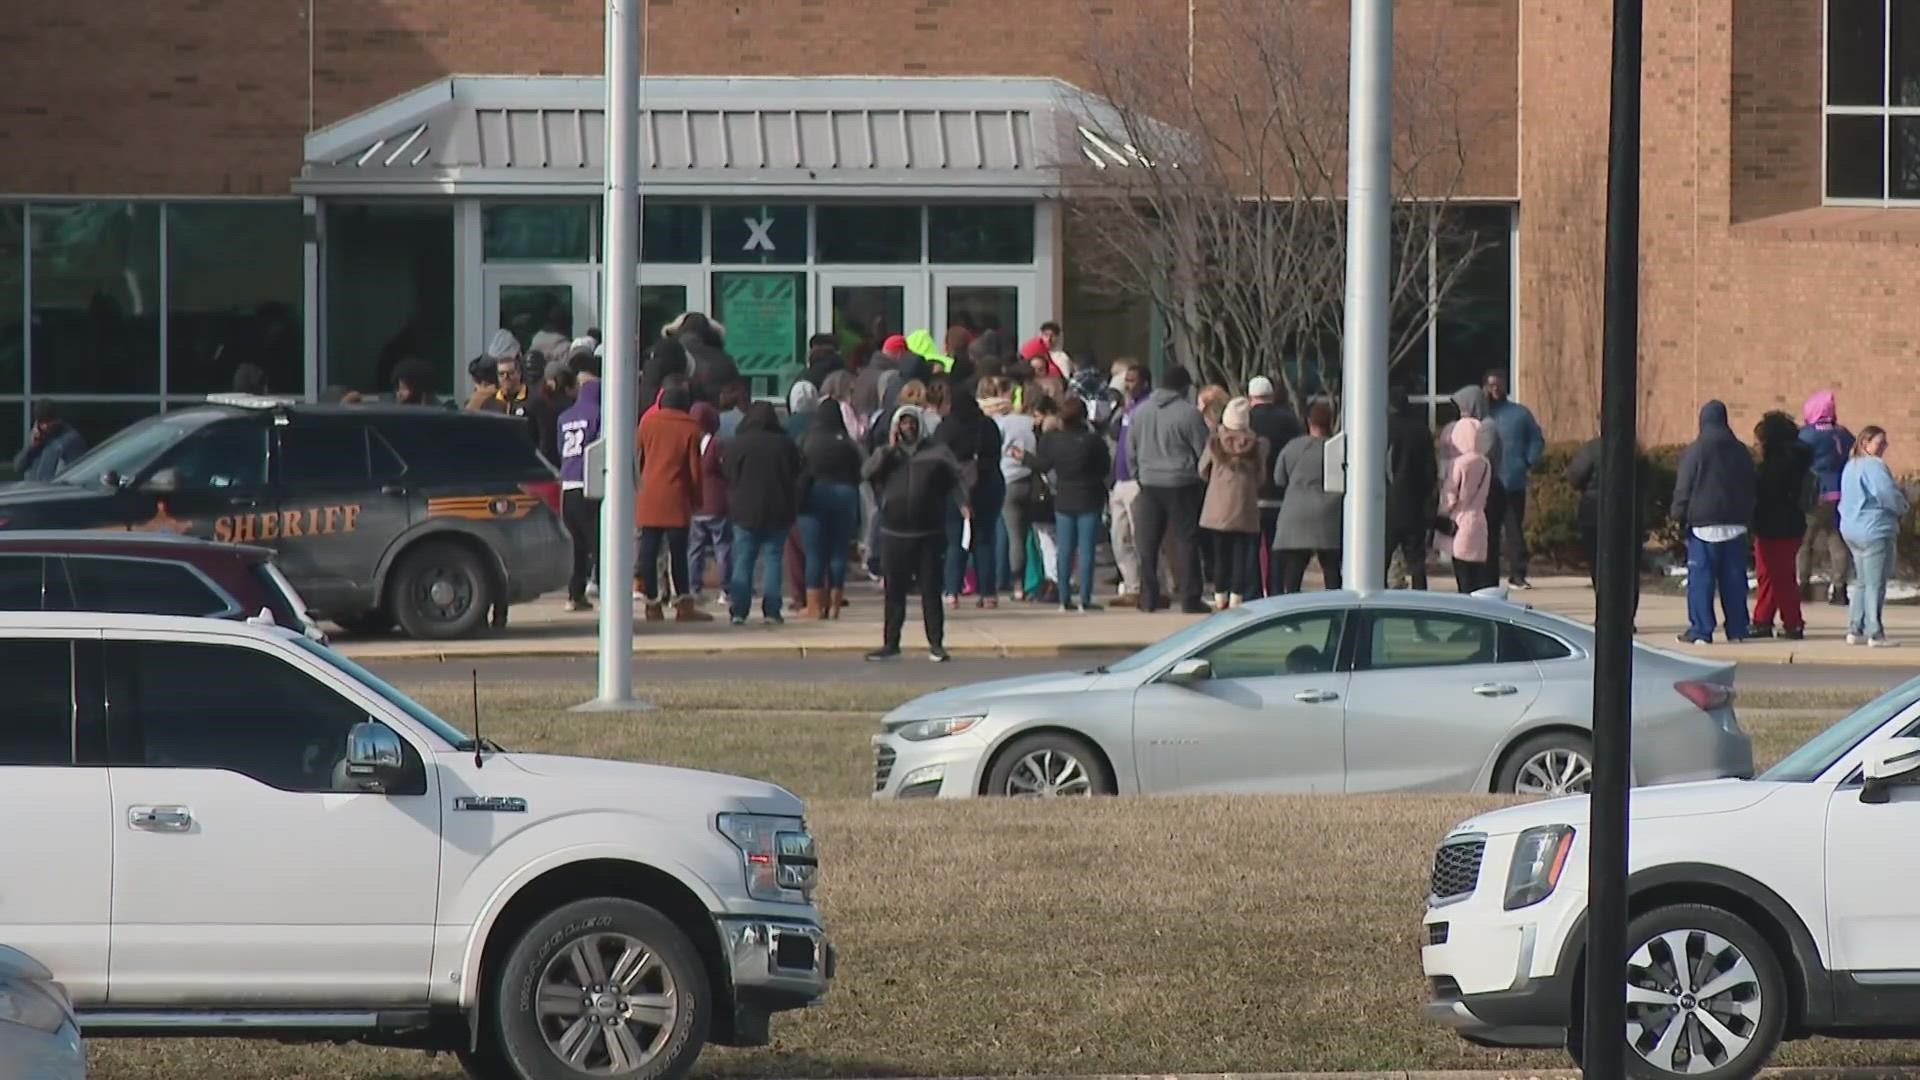 Police intitially were called to the school Thursday morning on a report of an active shooter.